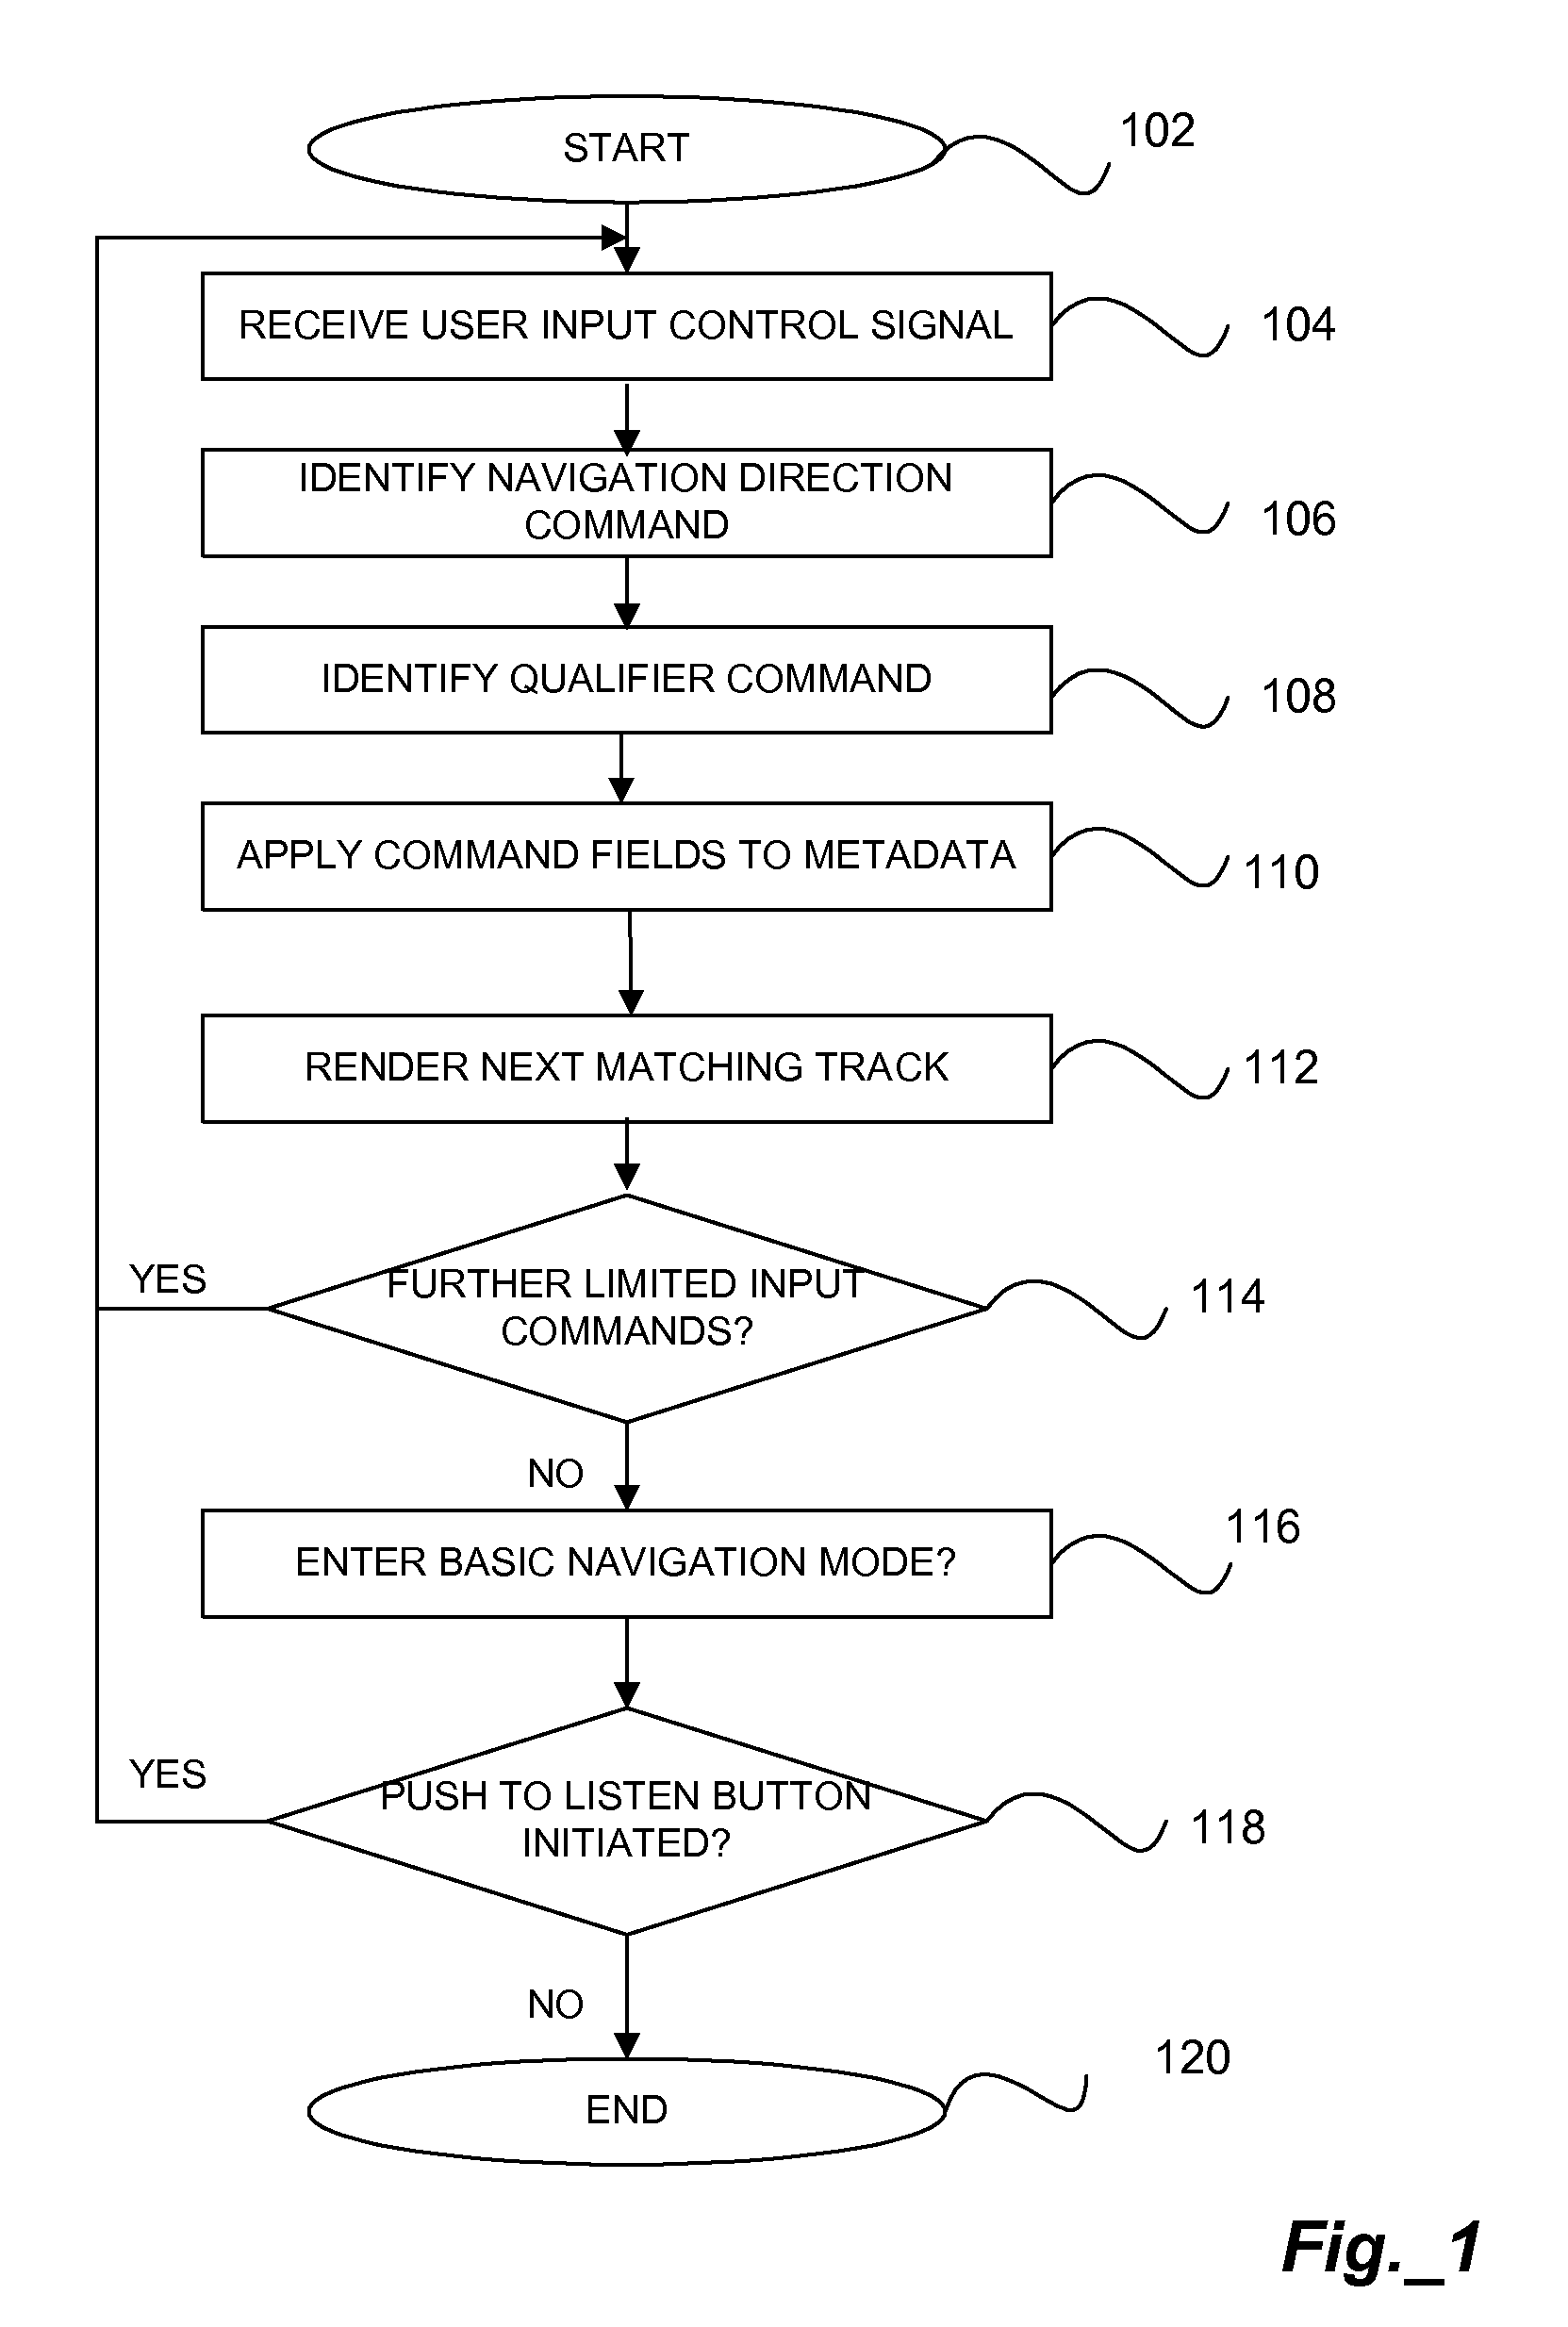 System and method for modifying media content playback based on limited input